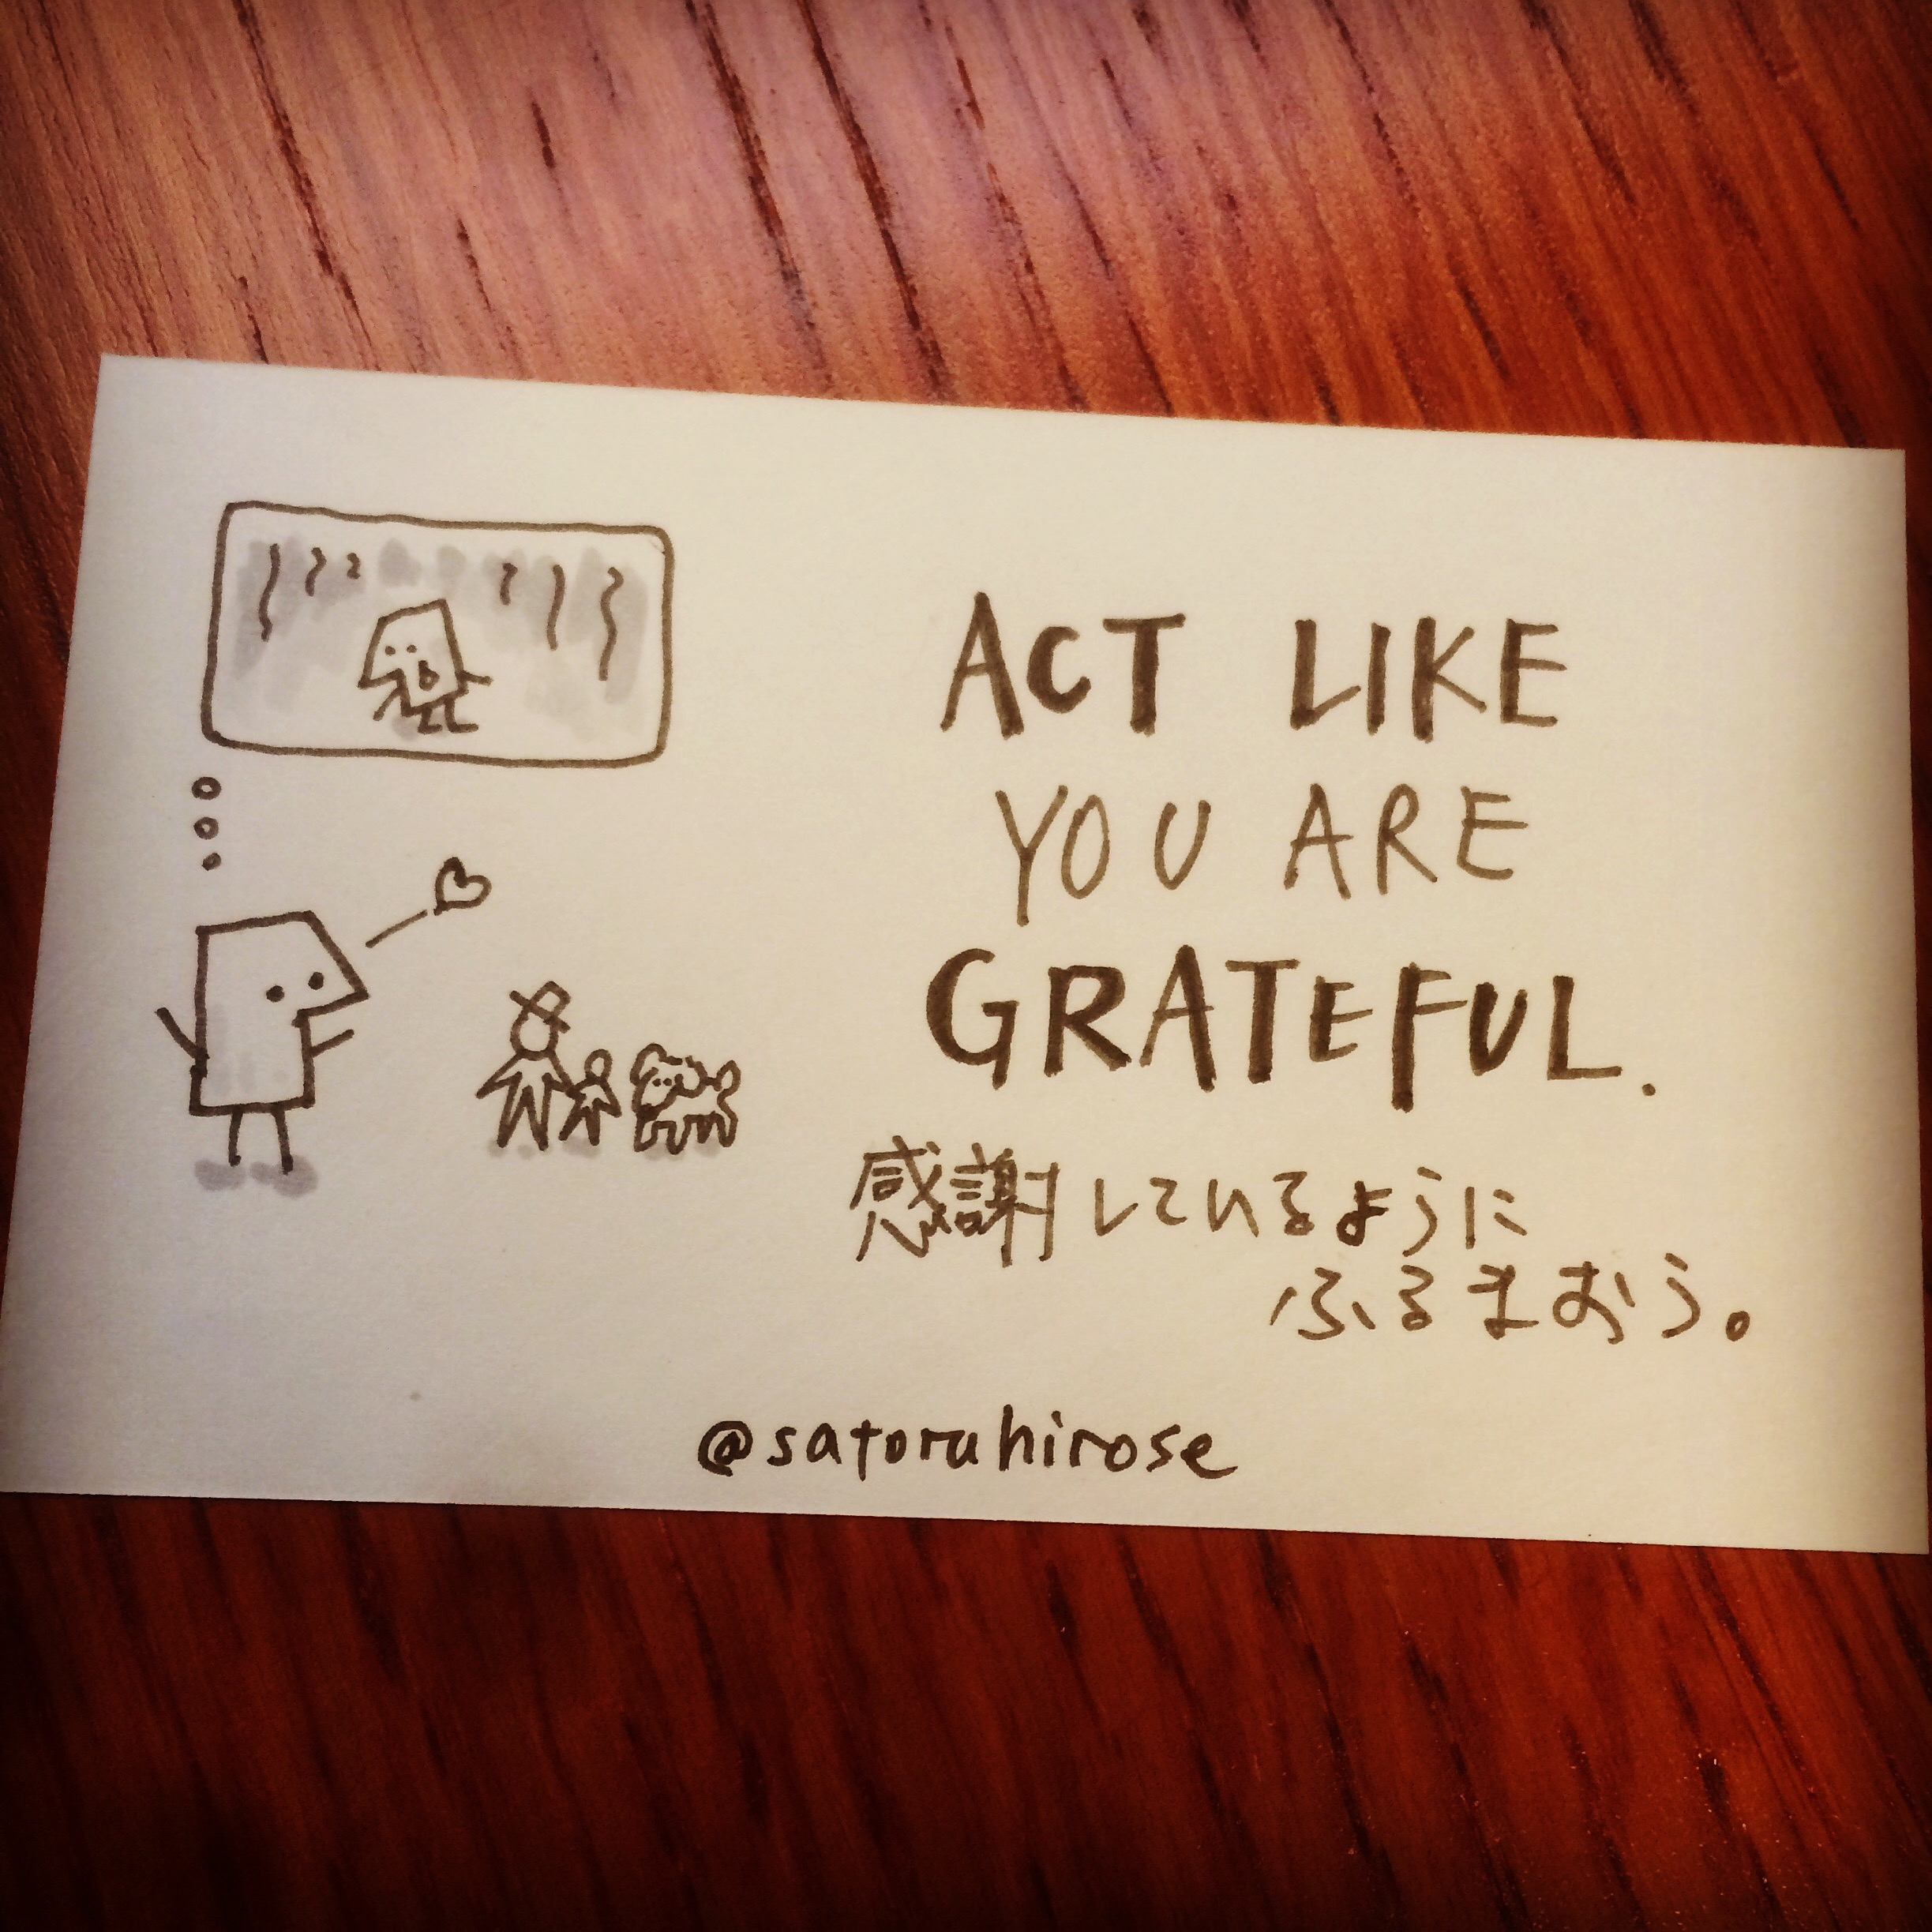 Act like you are grateful.